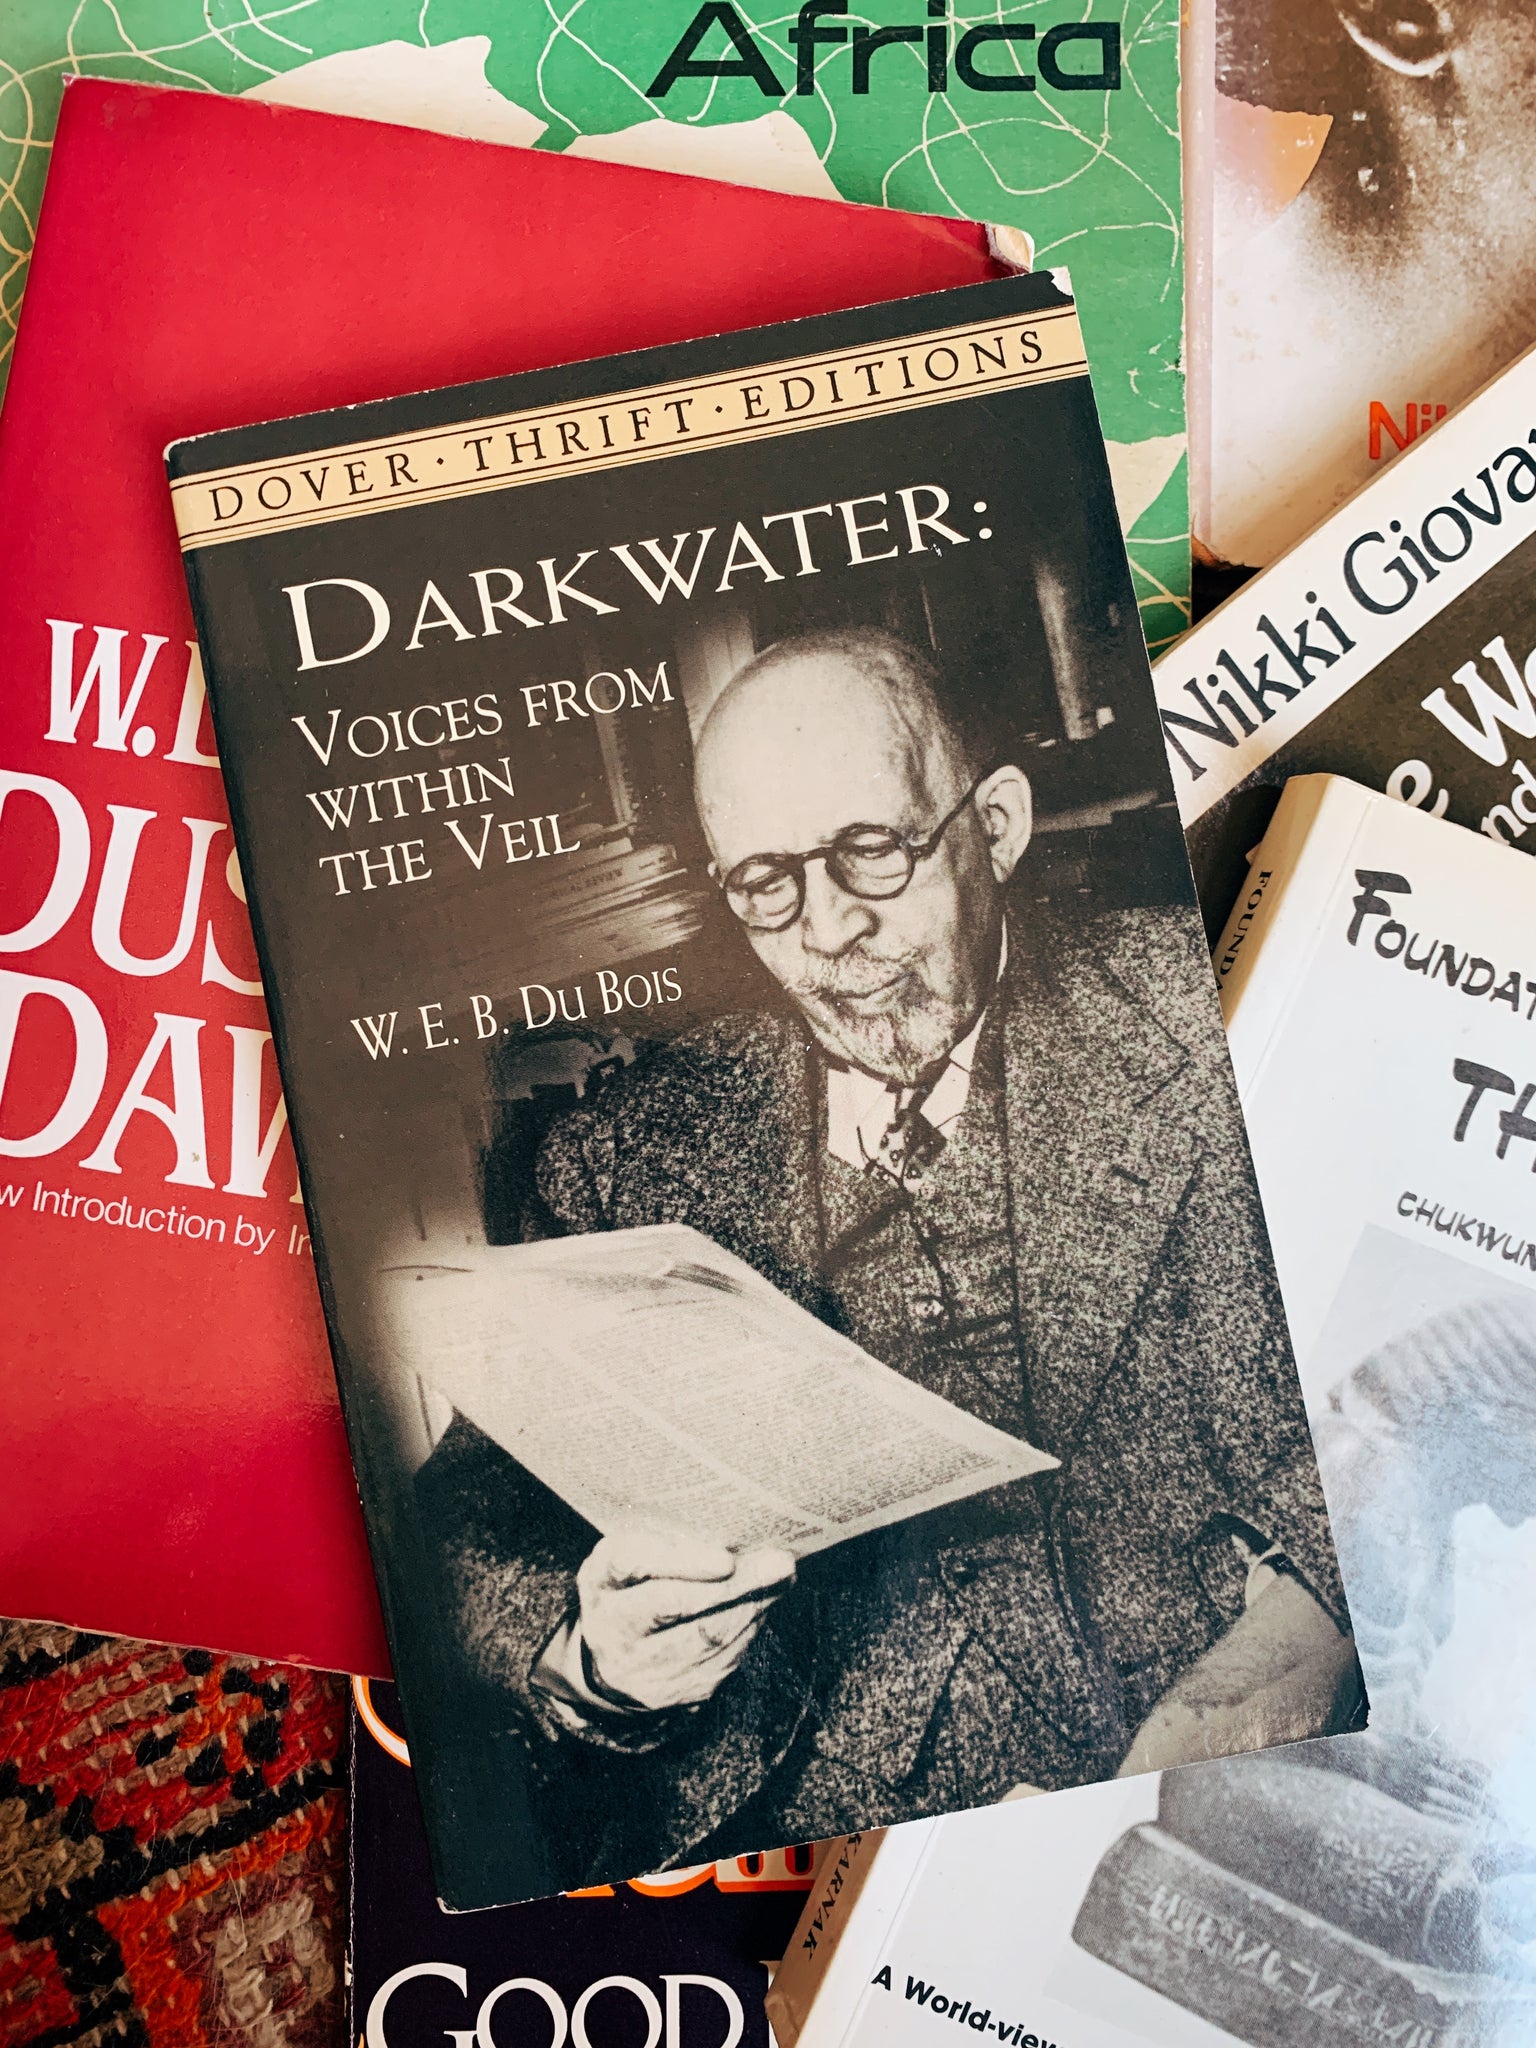 Vintage "Darkwater: Voices From Within The Veil” by W.E.B. DuBois (1999)